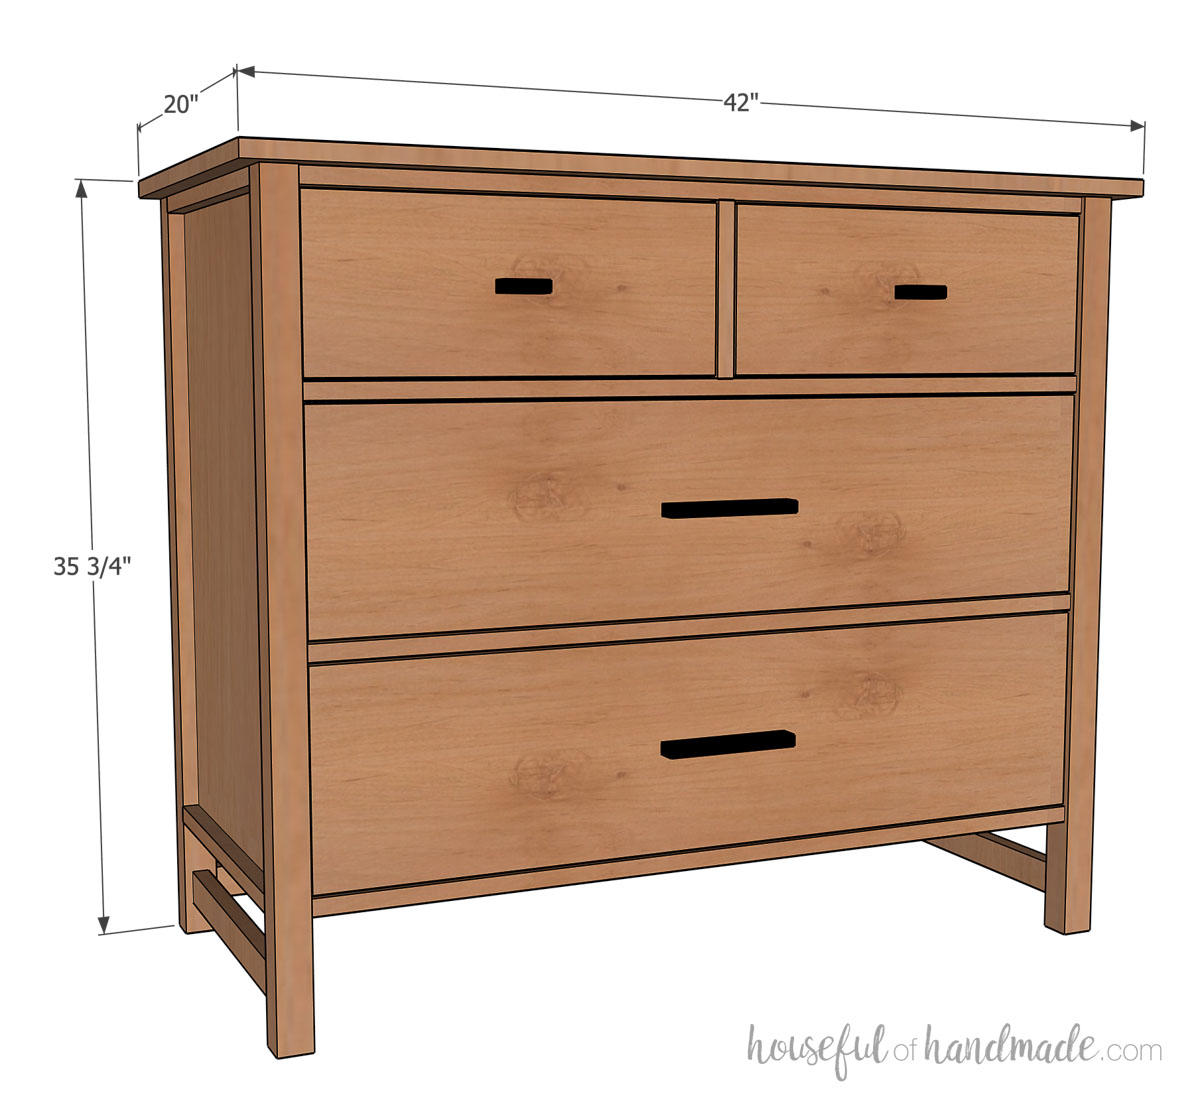 3D sketch of the 4 drawer dresser with dimensions noted.